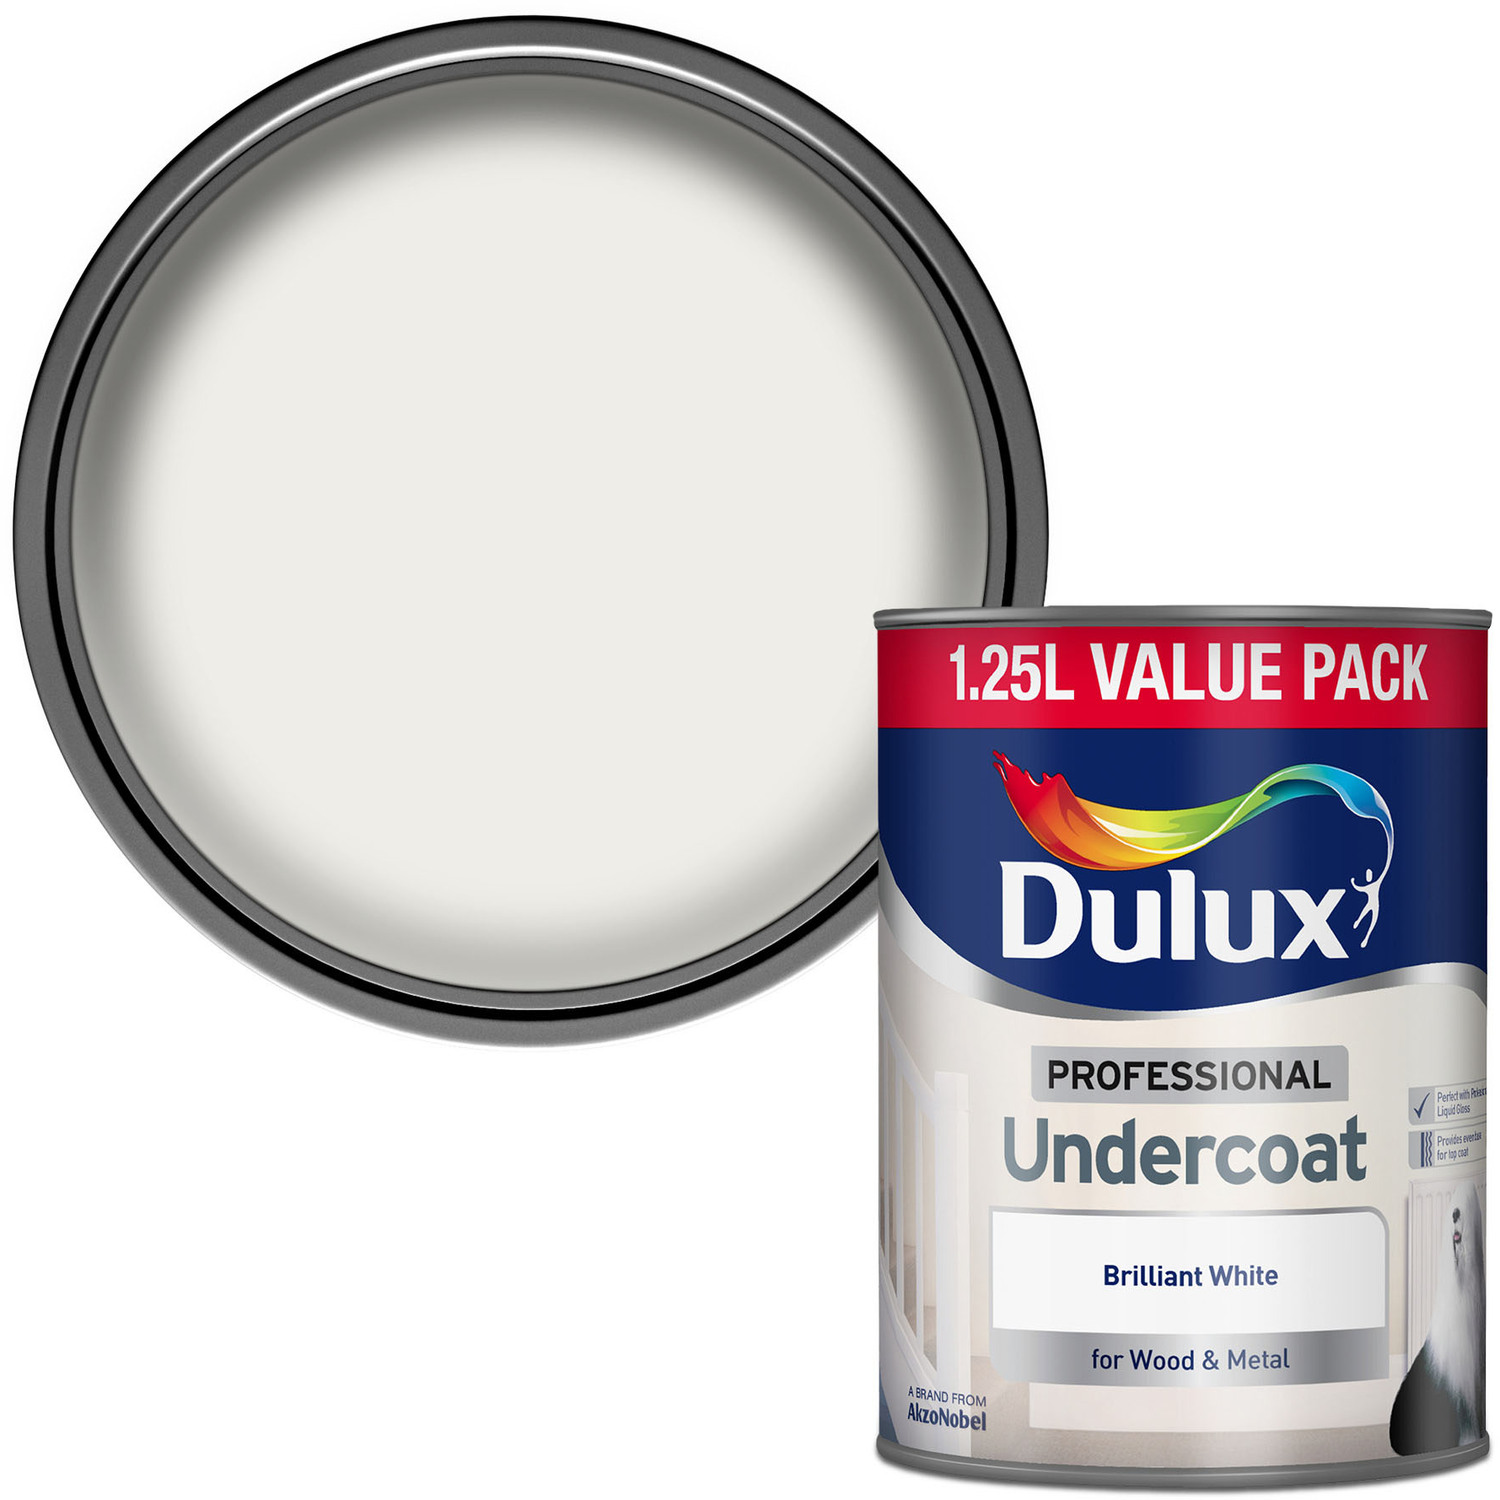 Dulux Professional Wood and Metal Pure Brilliant White Undercoat 1.25L Image 1